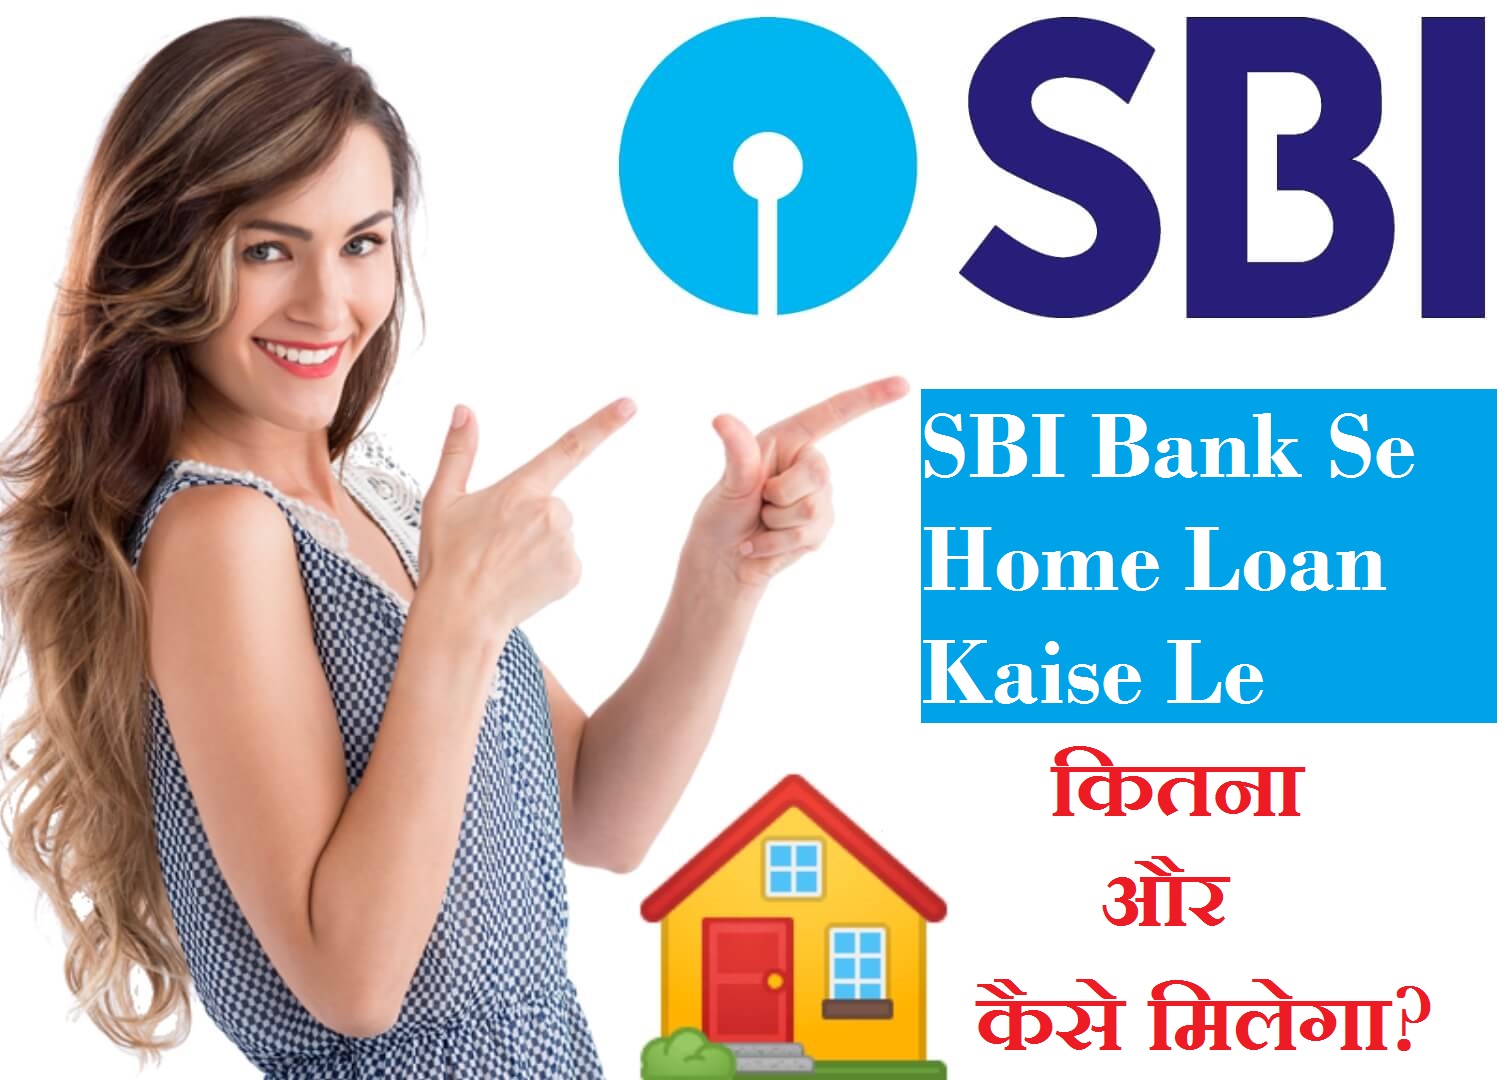 You are currently viewing SBI Bank Se Home Loan Kaise Le: SBI Home Loan Apply Online – SBI Se Home Loan Kaise Le In Hindi